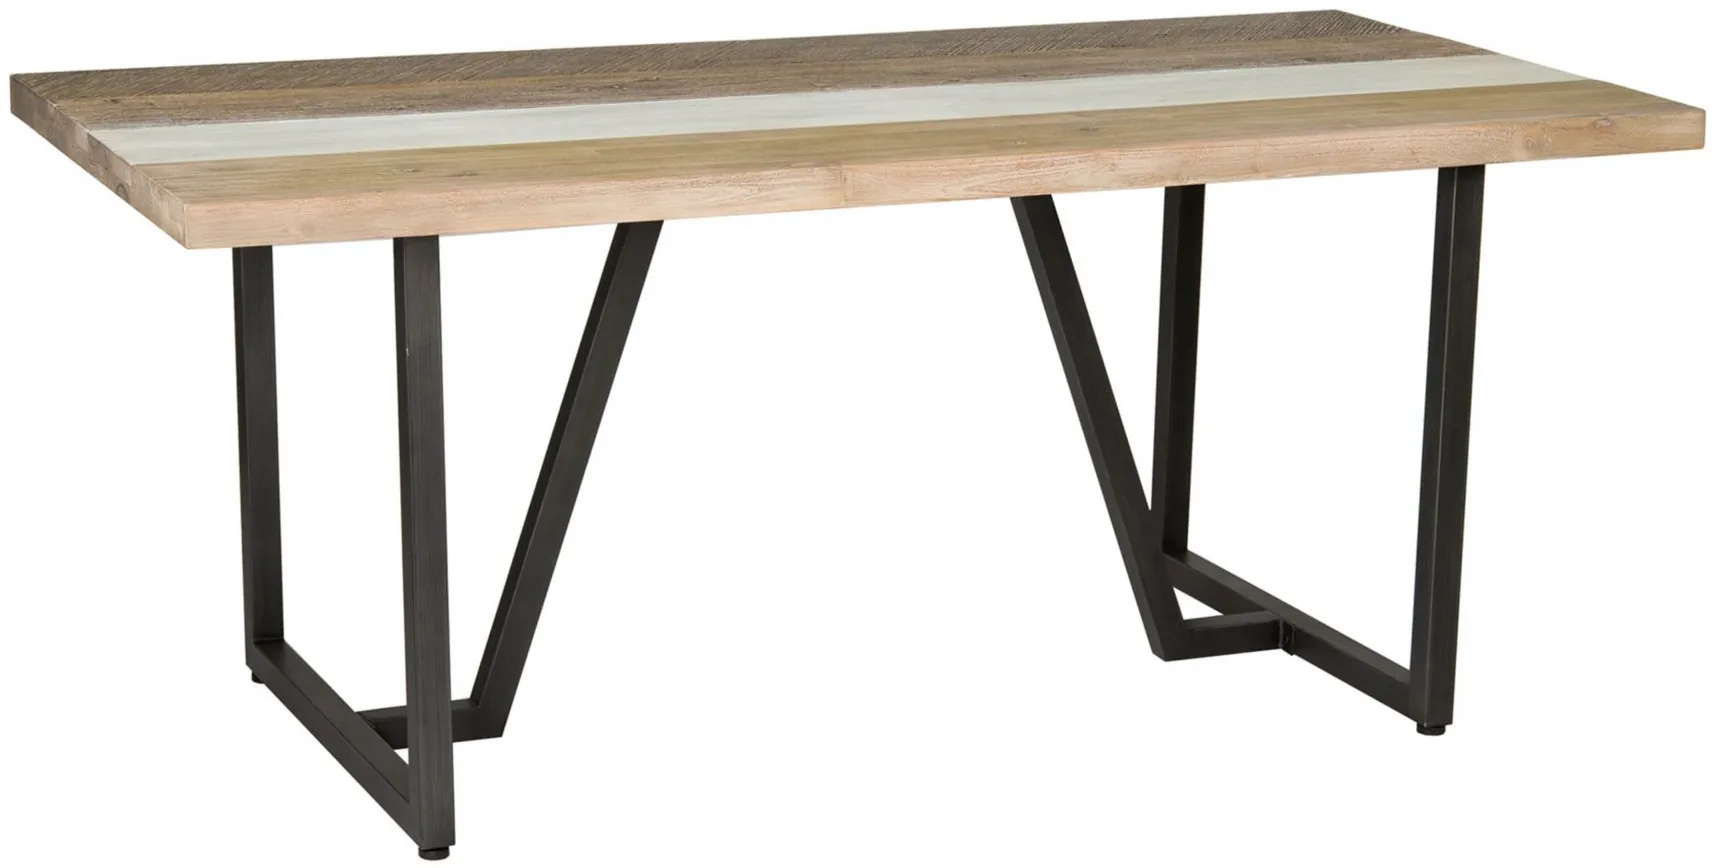 Metro Havana Dining Table in Brown, White by LH Imports Ltd